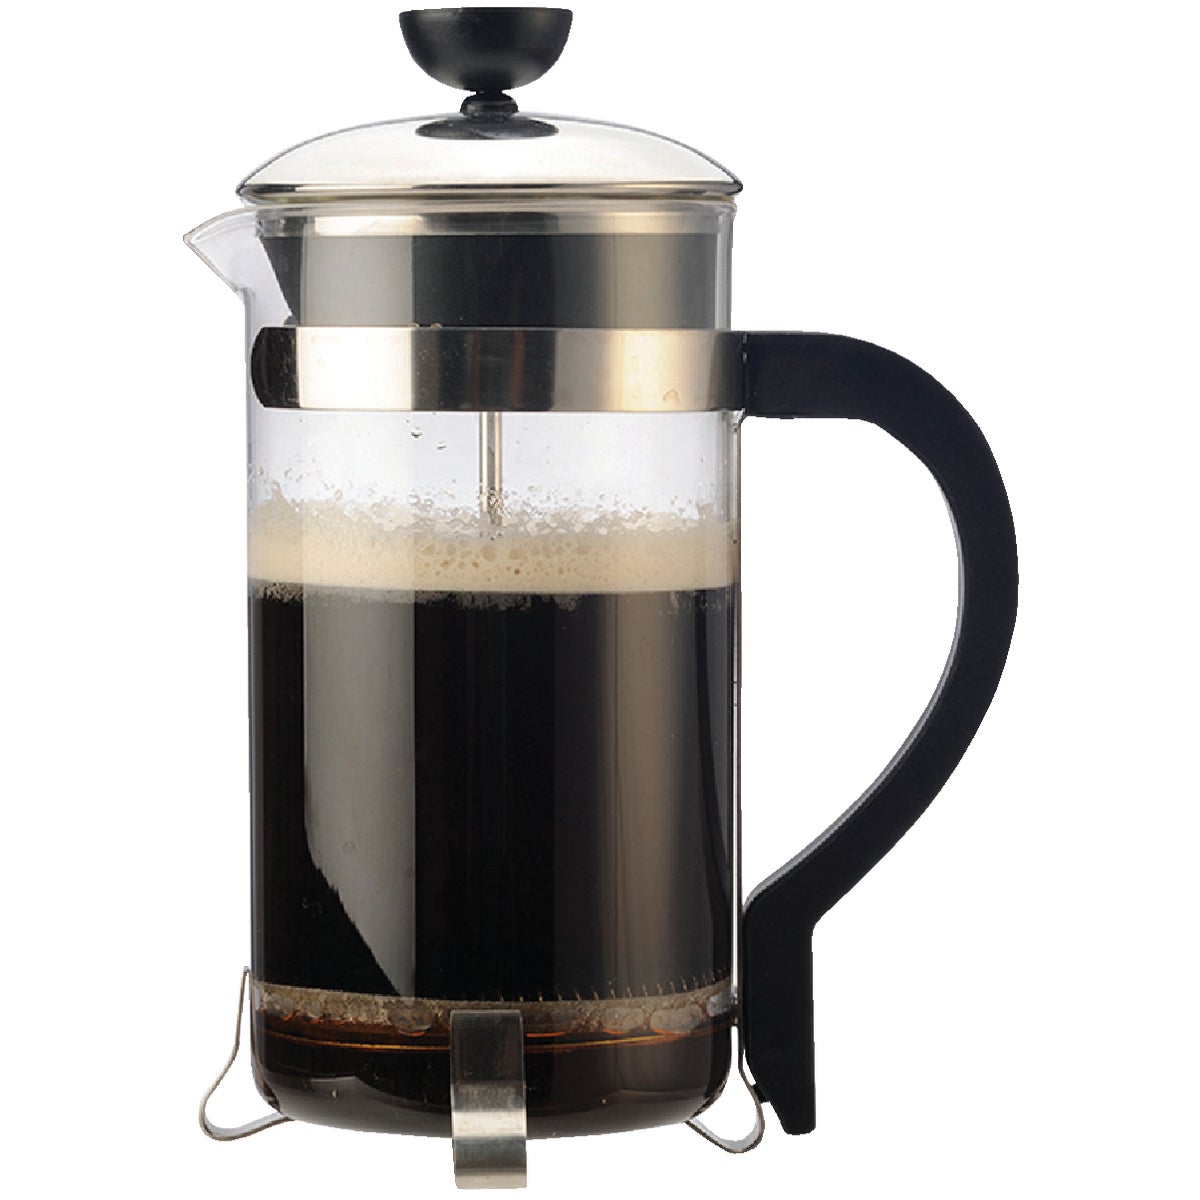 Item 601555, Borosilicate glass coffee press has stainless steel parts and is accented 